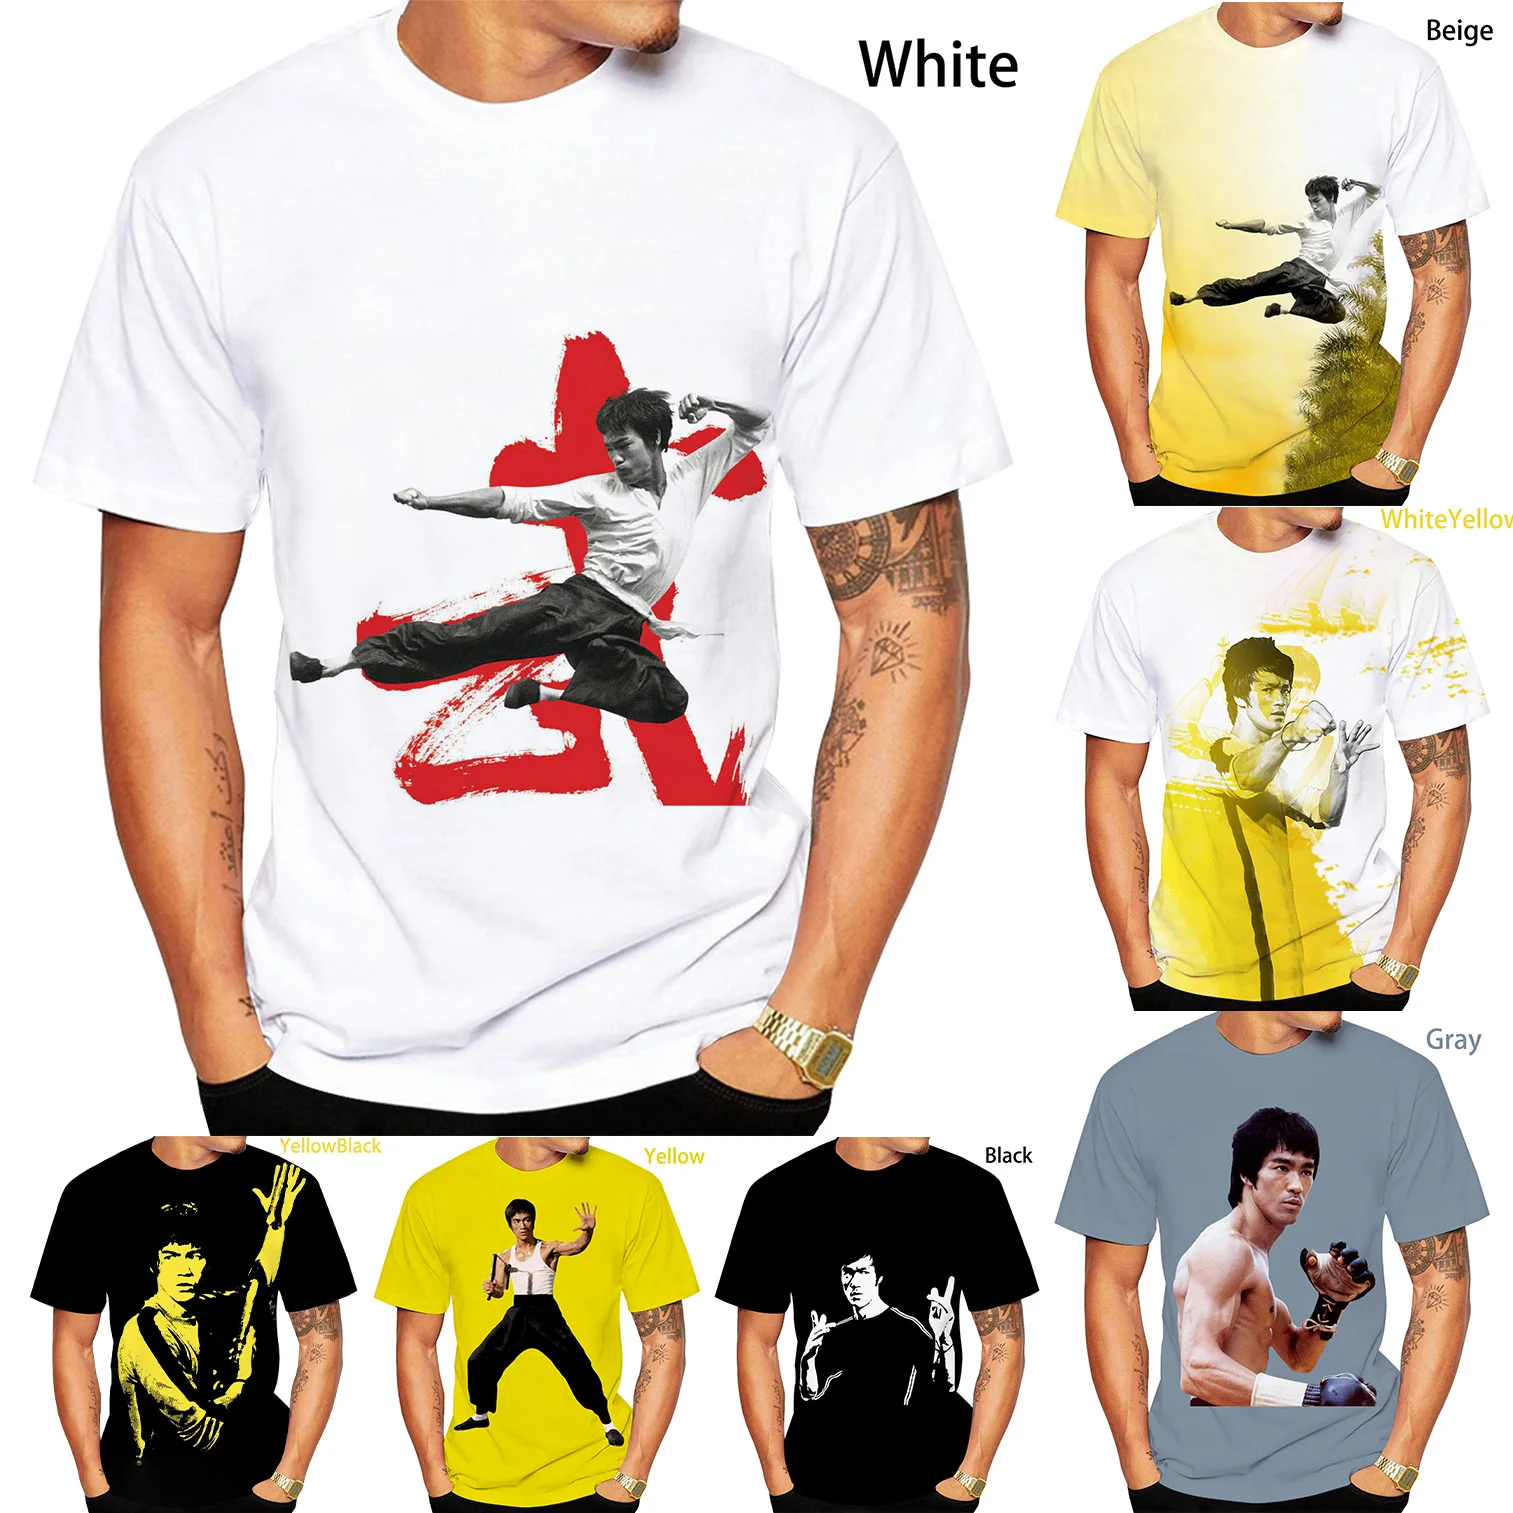 Newest Fashion 3D Printing Bruce Lee T Shirt Cool Unisex Funny Short Sleeved Tees Hot Men/Women Summer Pullover Tops